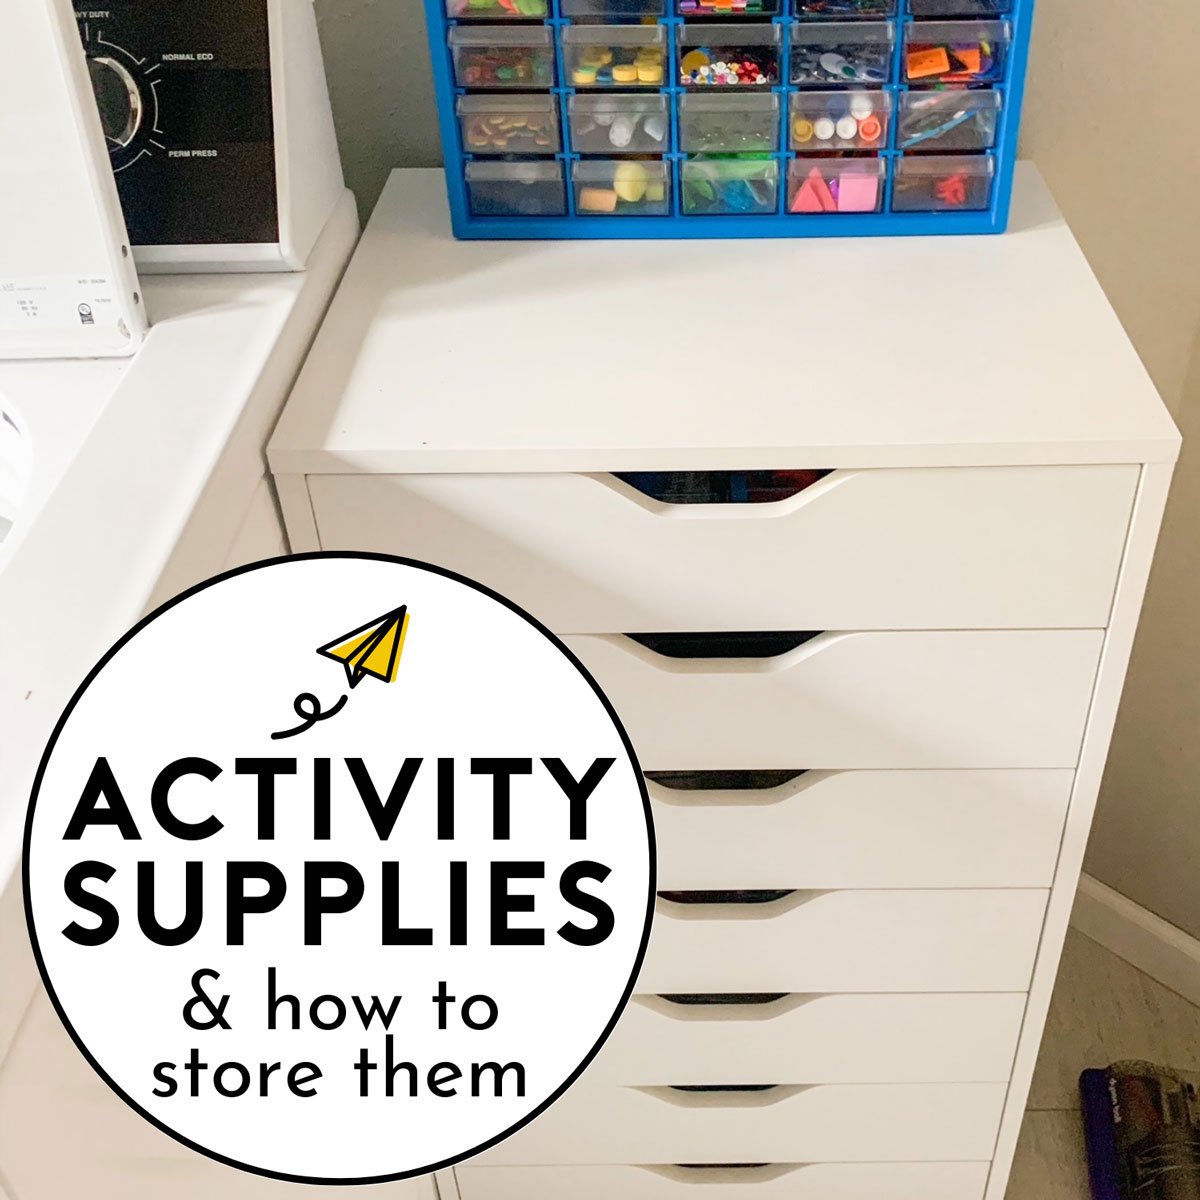 Activity supplies and how to store them: image shows a white set of drawers with a blue tackle box on top.